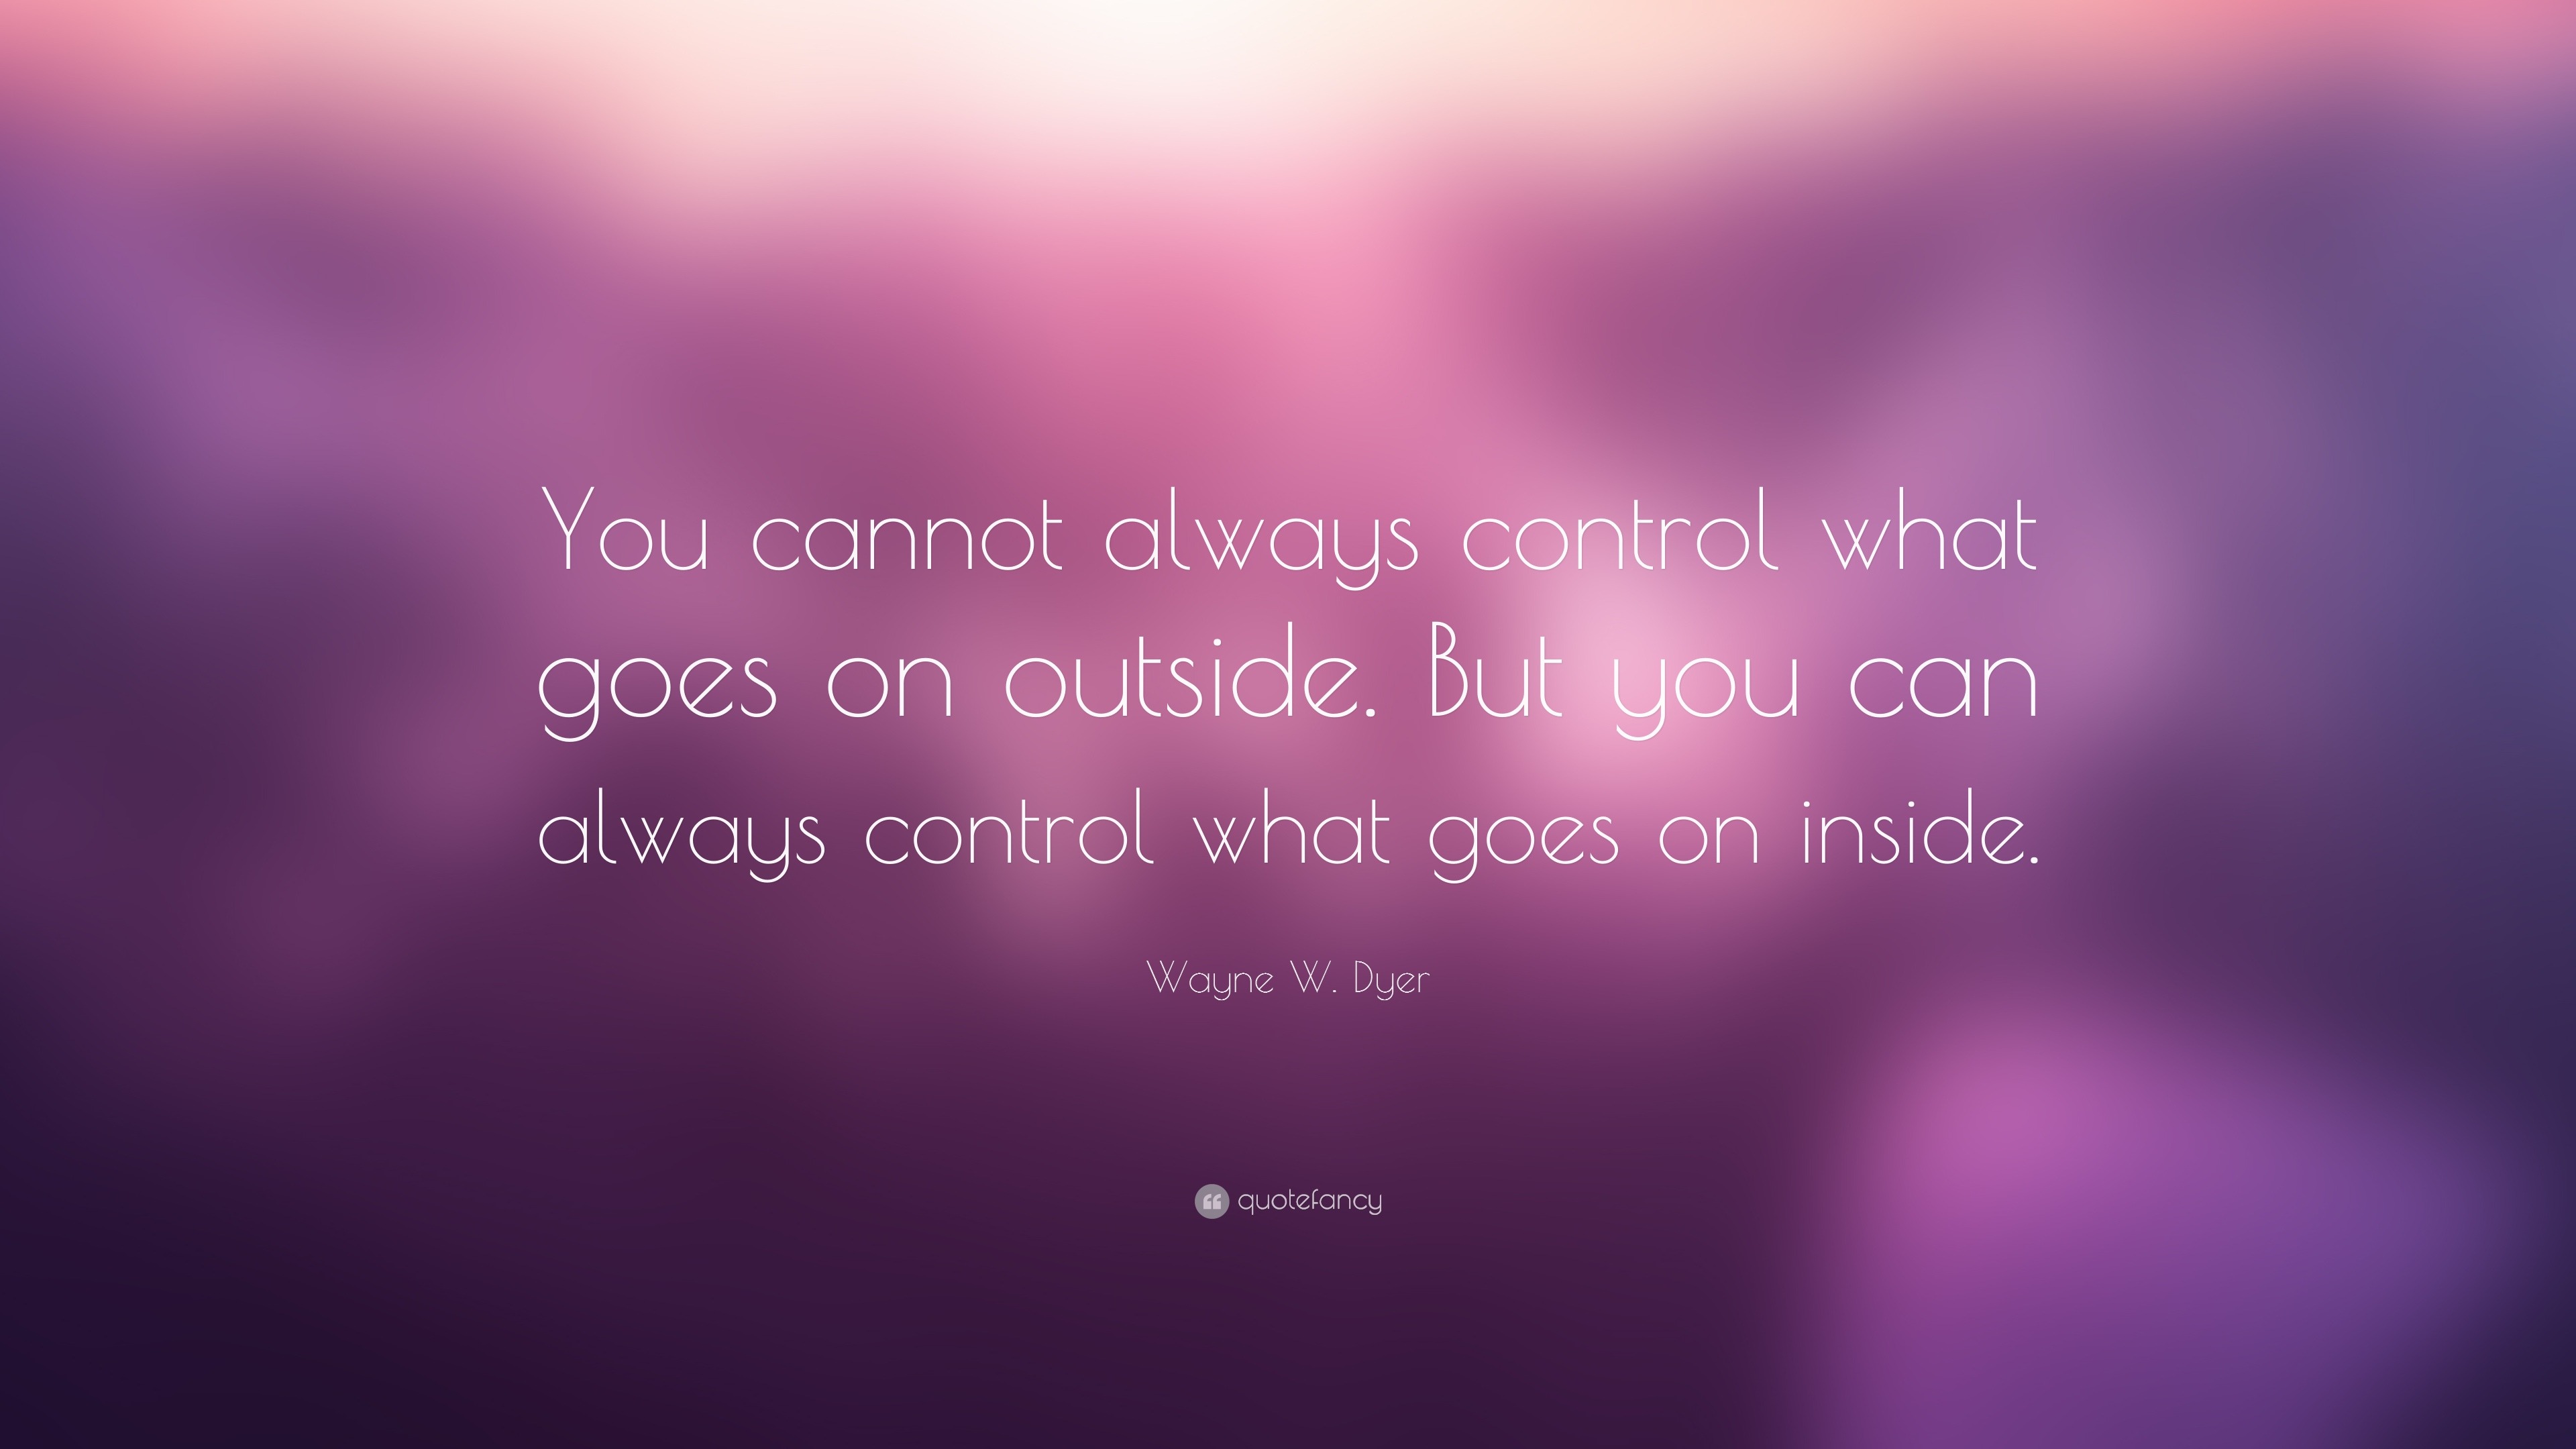 Wayne W. Dyer Quote: “You cannot always control what goes on outside ...